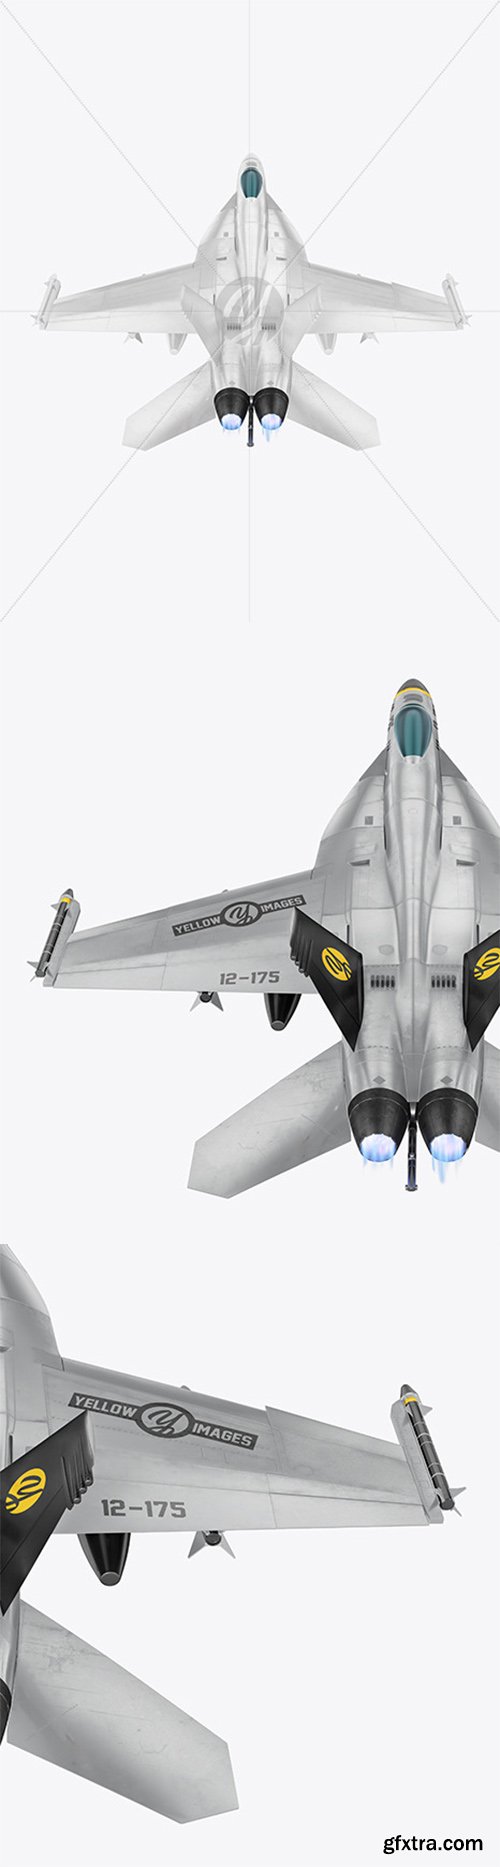 Combat Fighter - Back Side View (High-Angle Shot)